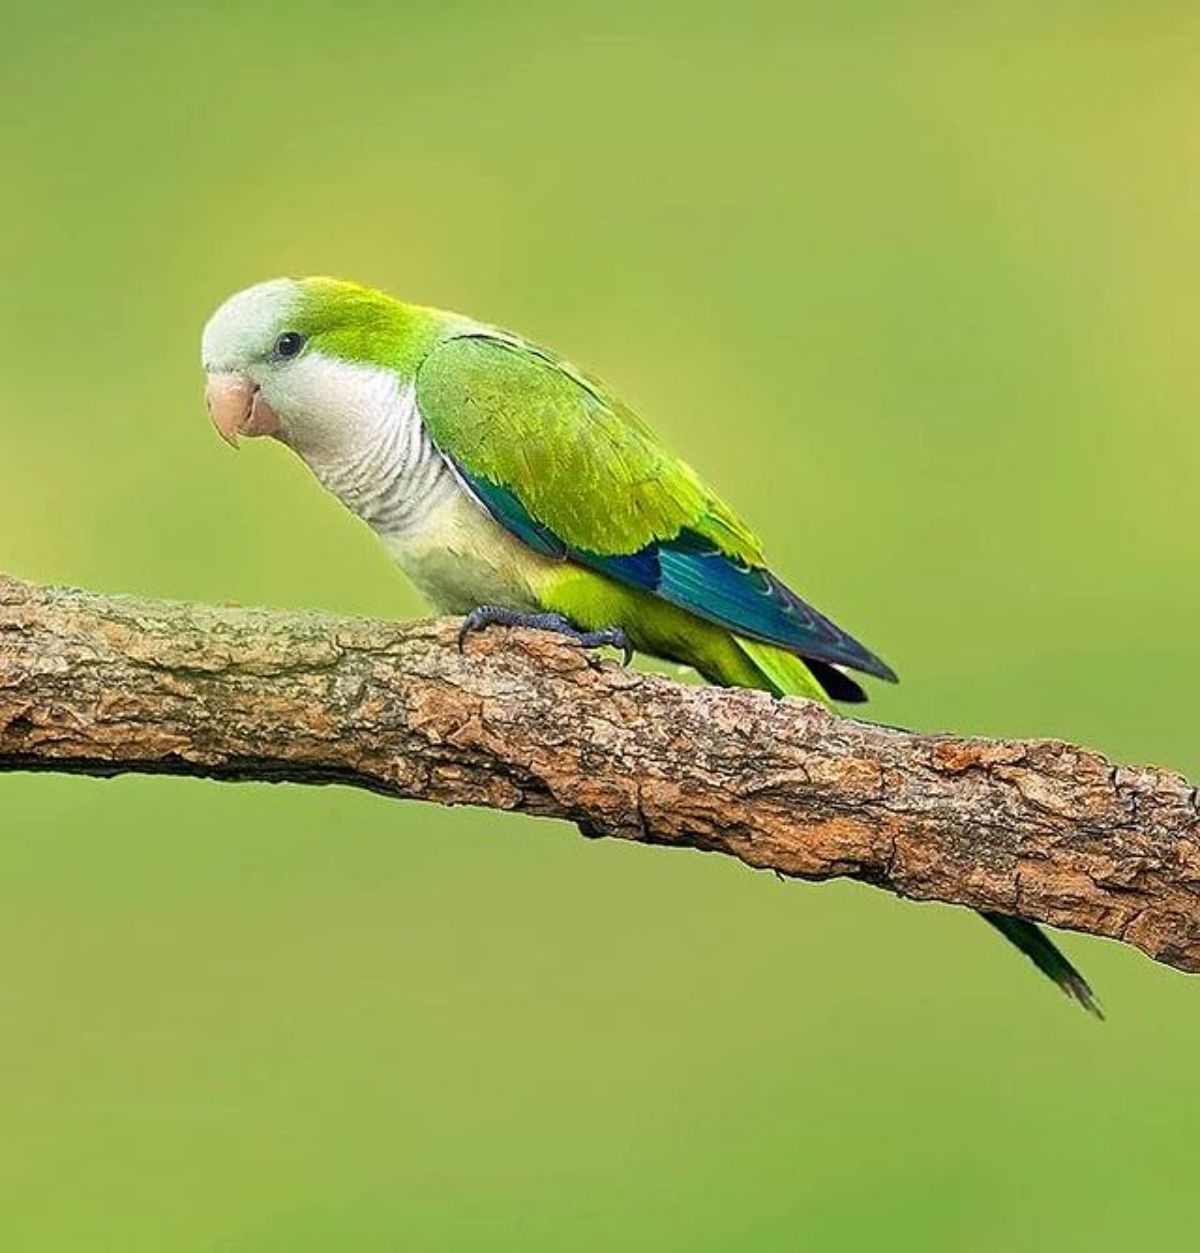 An adorable Monk Parakeet perched on an old branch.